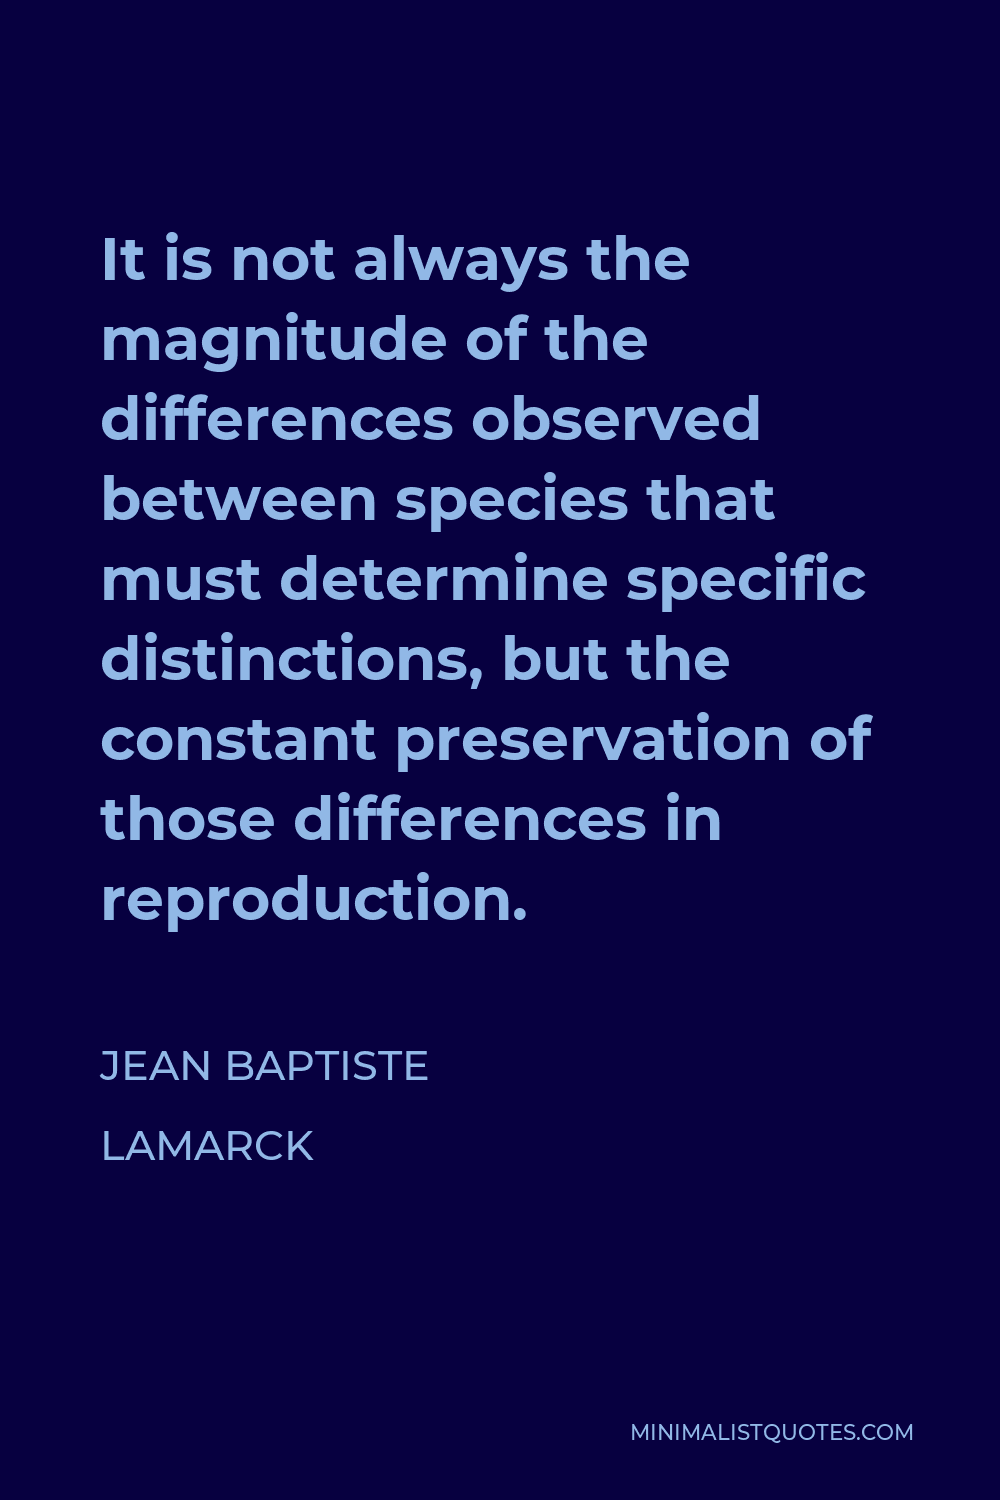 Jean Baptiste Lamarck Quote - It is not always the magnitude of the differences observed between species that must determine specific distinctions, but the constant preservation of those differences in reproduction.